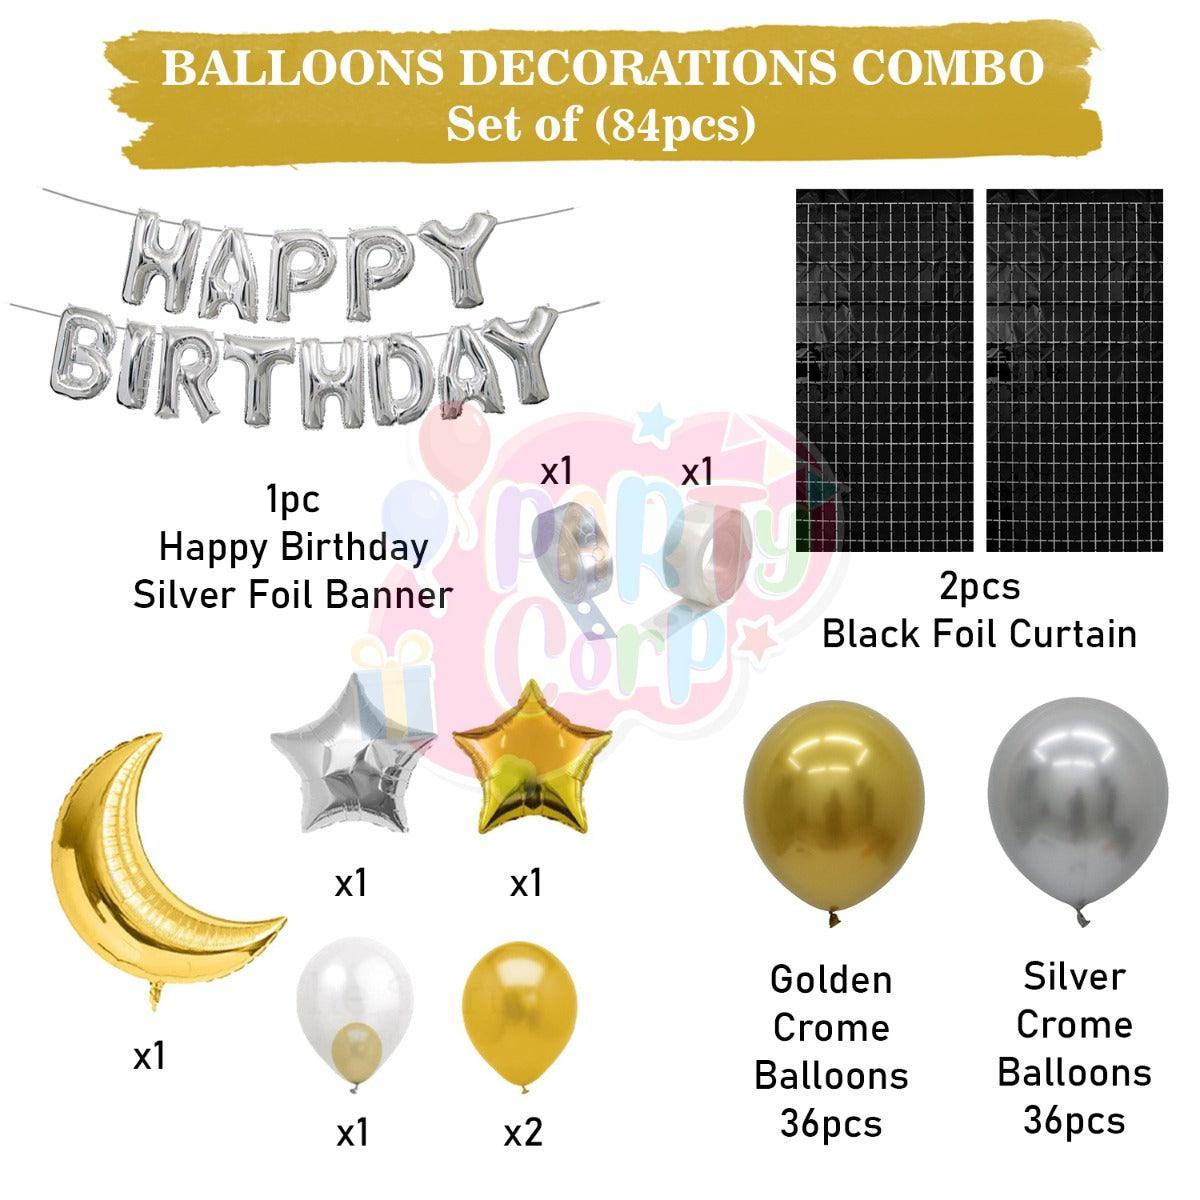 PartyCorp Happy Birthday Decoration Kit Combo 84 Pcs - Gold & Silver Chrome Balloons, Silver Happy Birthday Foil Banner, Black Curtain, Moon & Stars Foil Balloons